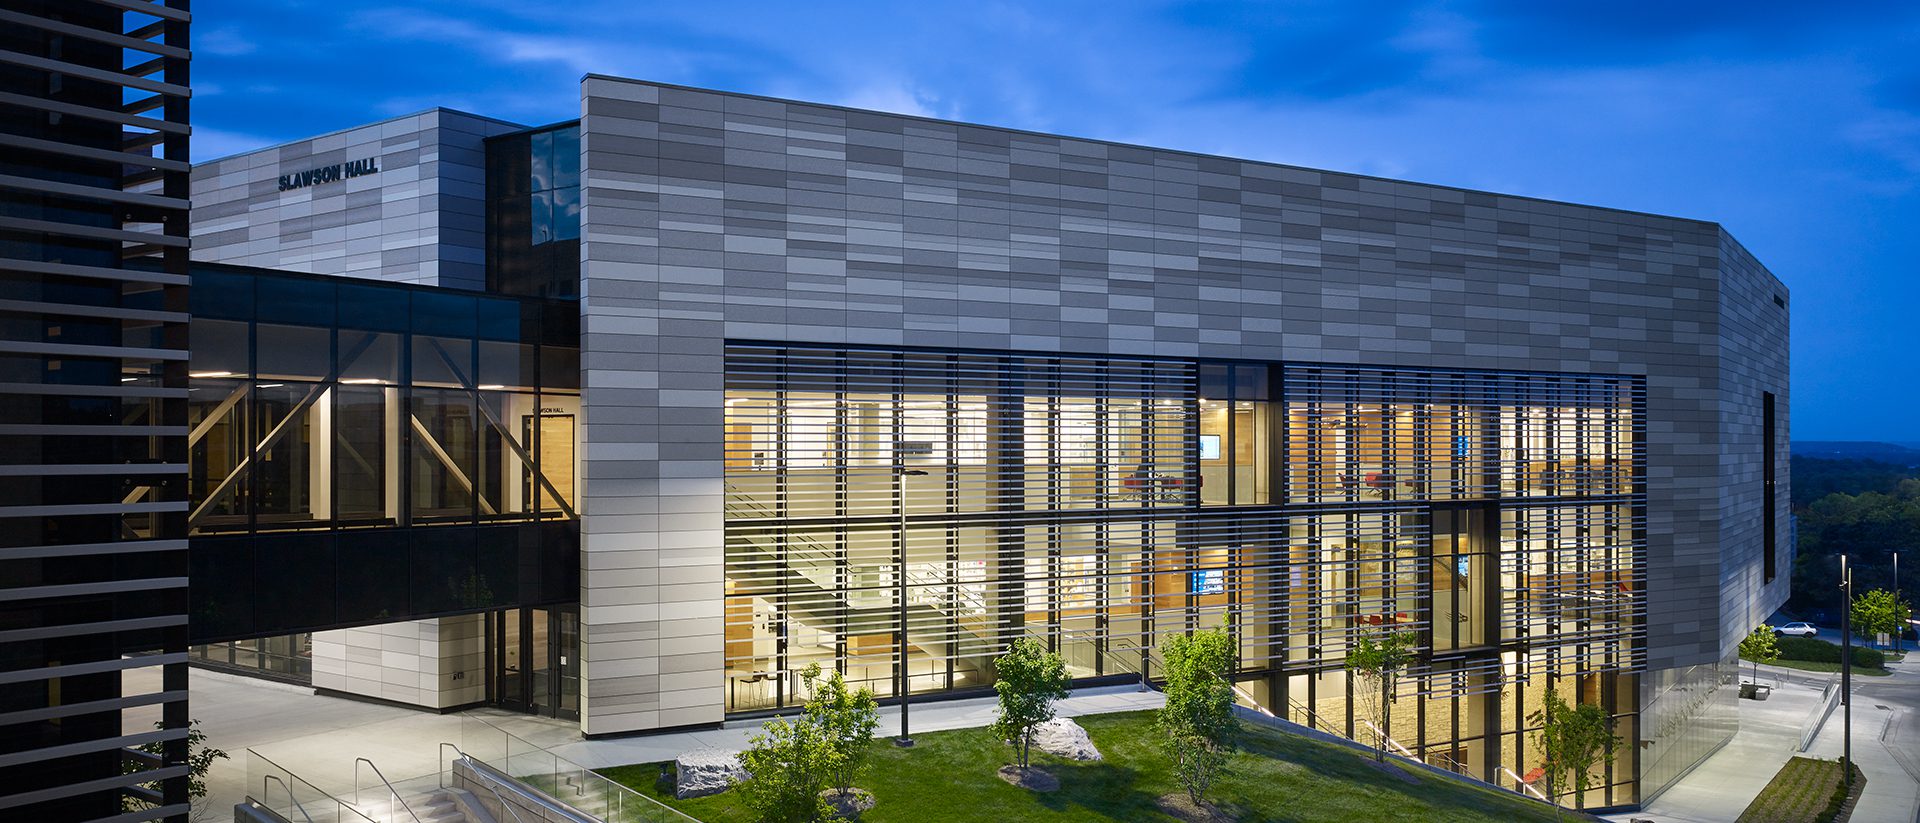 Image of the exterior of the Earth, Energy & Environment Center at dusk.